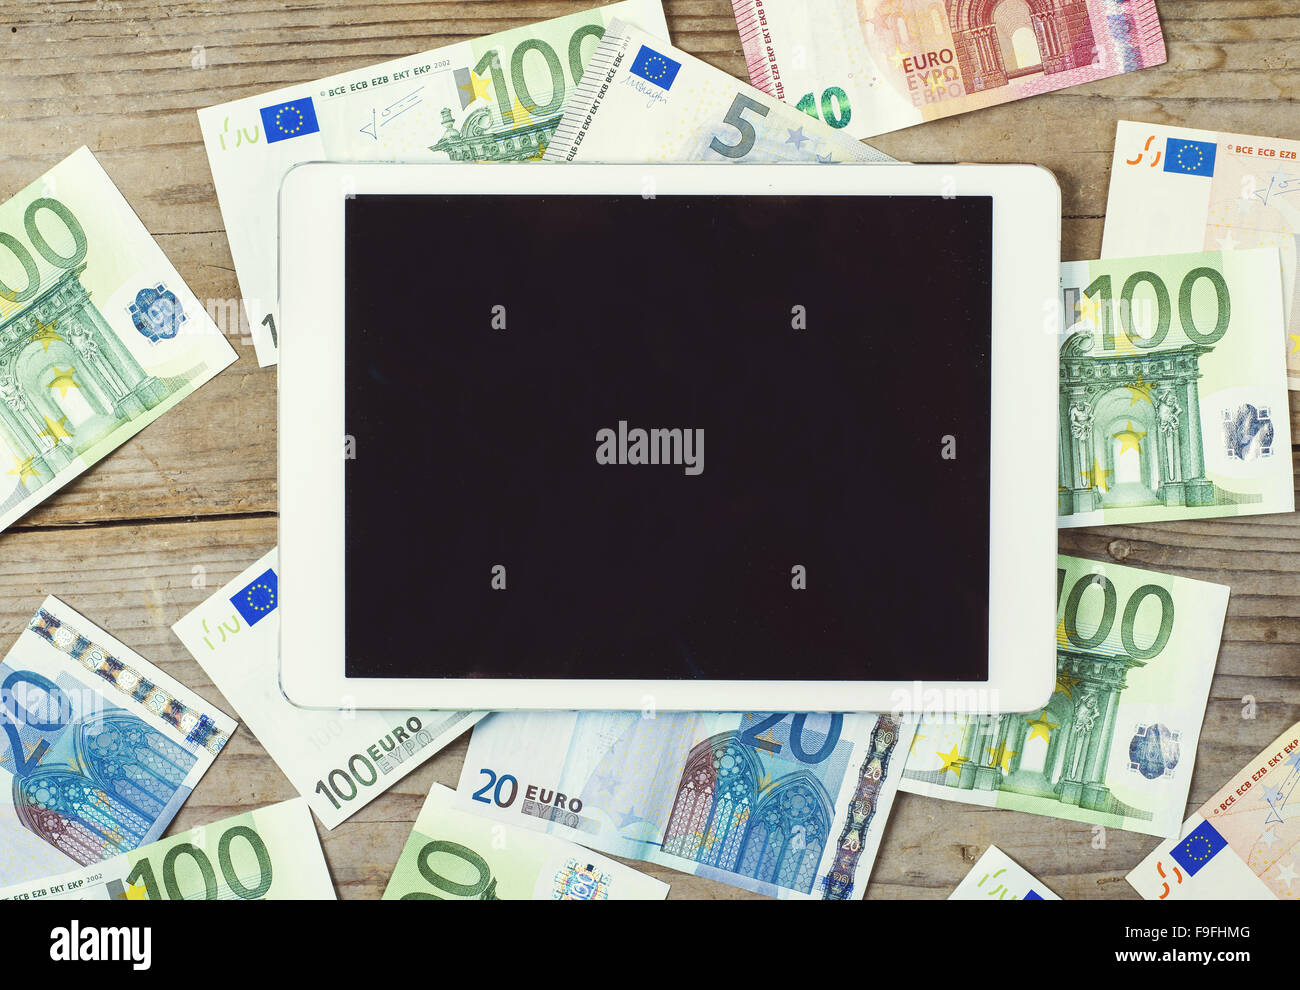 Tablet and European currency banknotes scattered on the wooden table background. View from above. Stock Photo